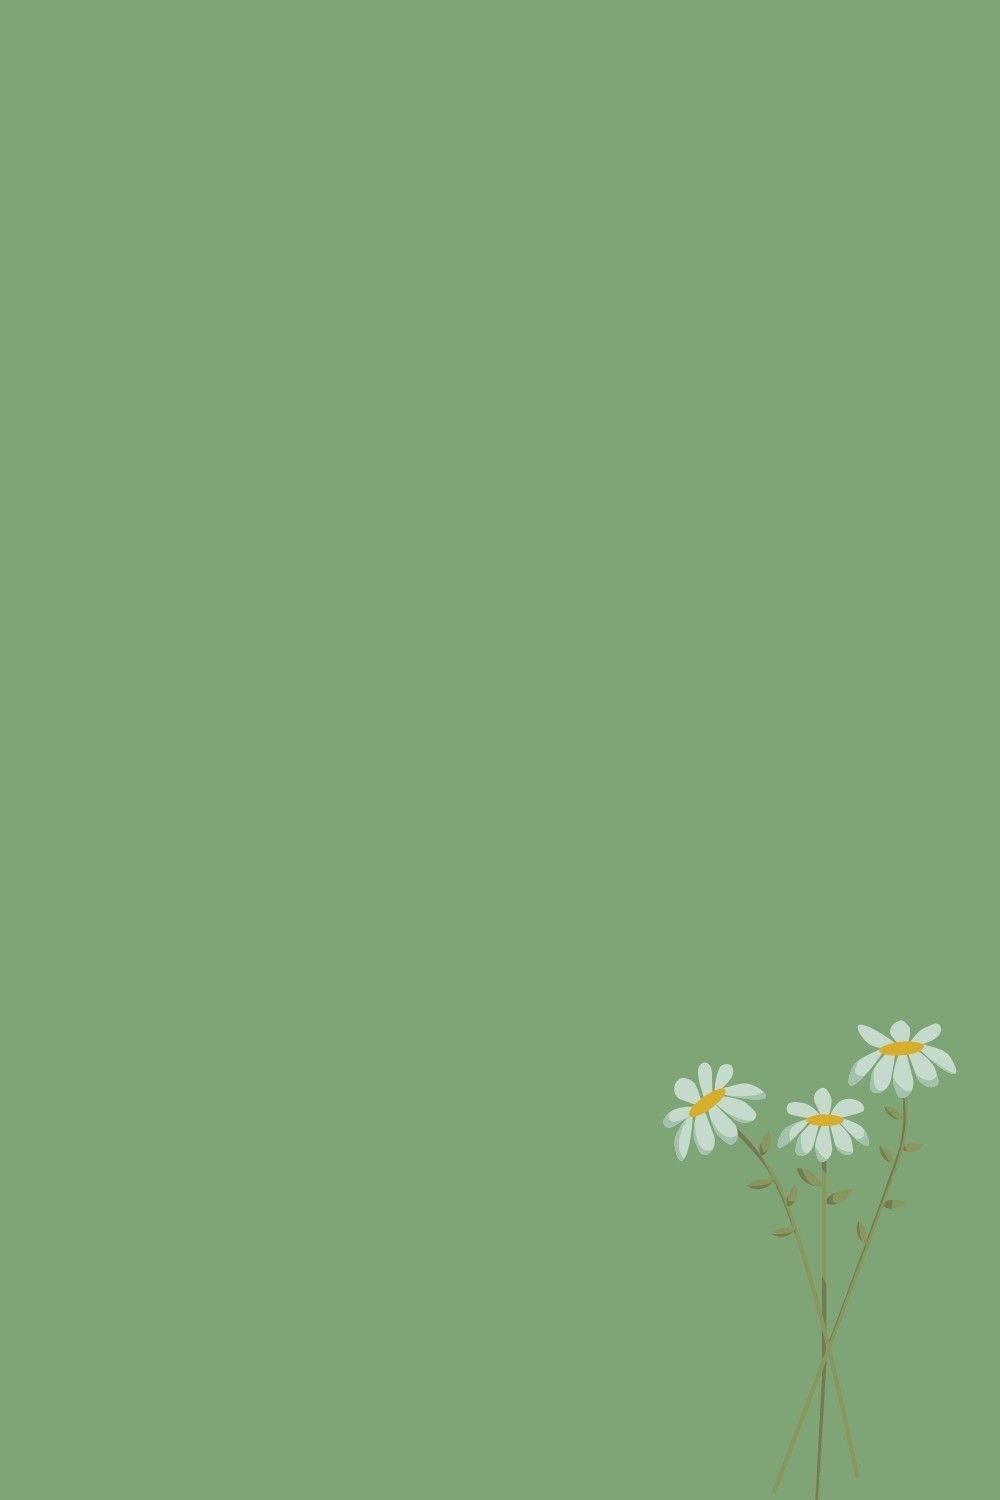 Sage Green Wallpaper for mobile phone, tablet, desktop computer and other devices HD and 4K wa. Mint green wallpaper, Sage green wallpaper, iPhone wallpaper green